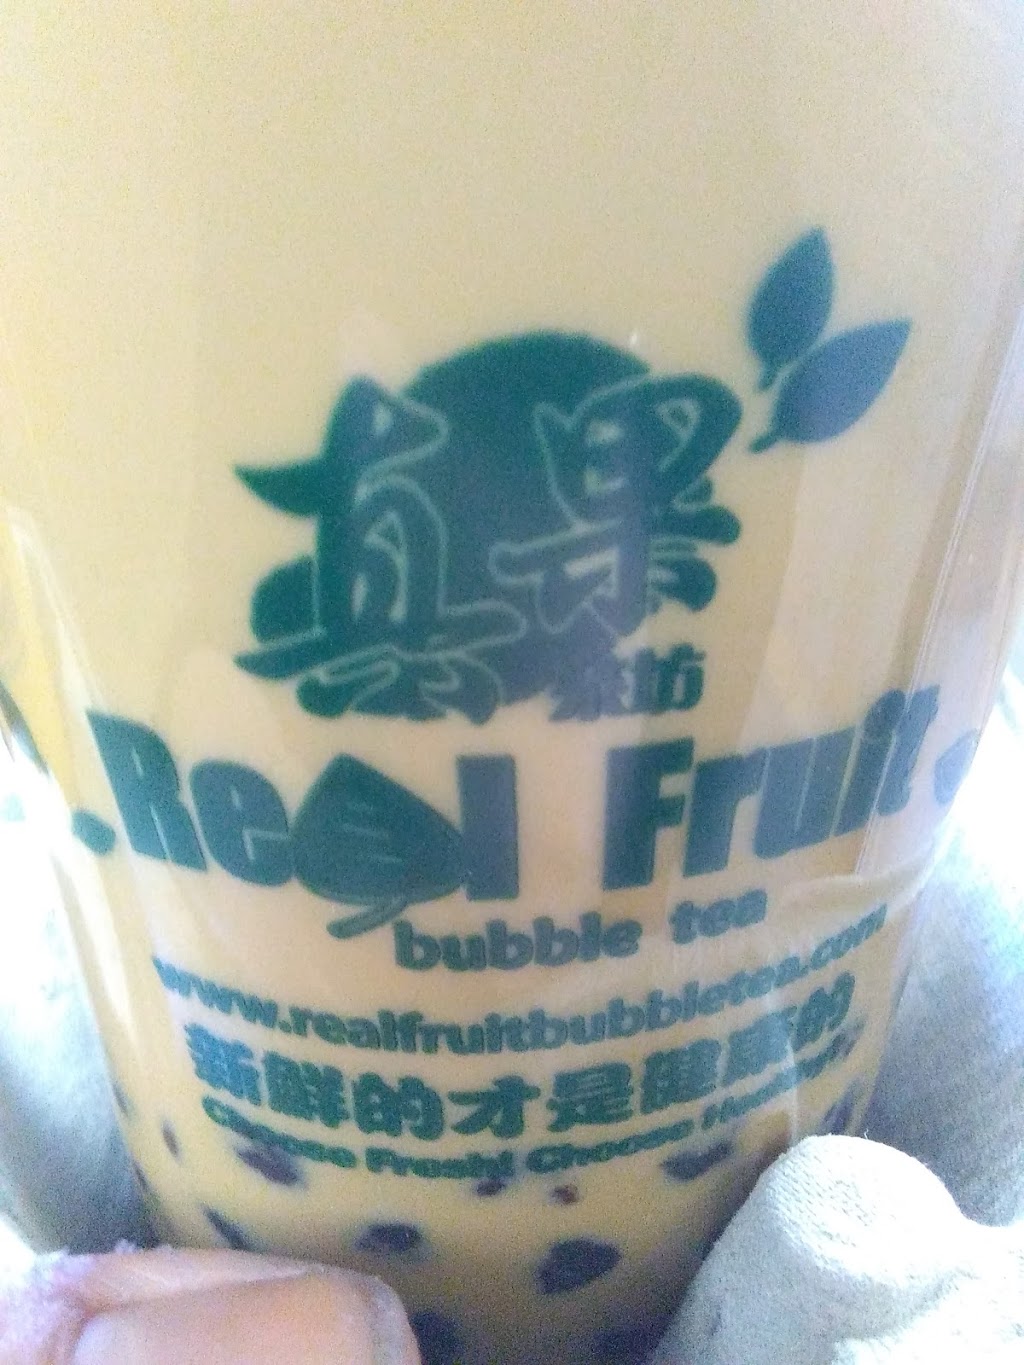 Real Fruit Bubble Tea | cafe | Westdale Mall, 1151 Dundas St W, Mississauga, ON L5C 1C6, Canada